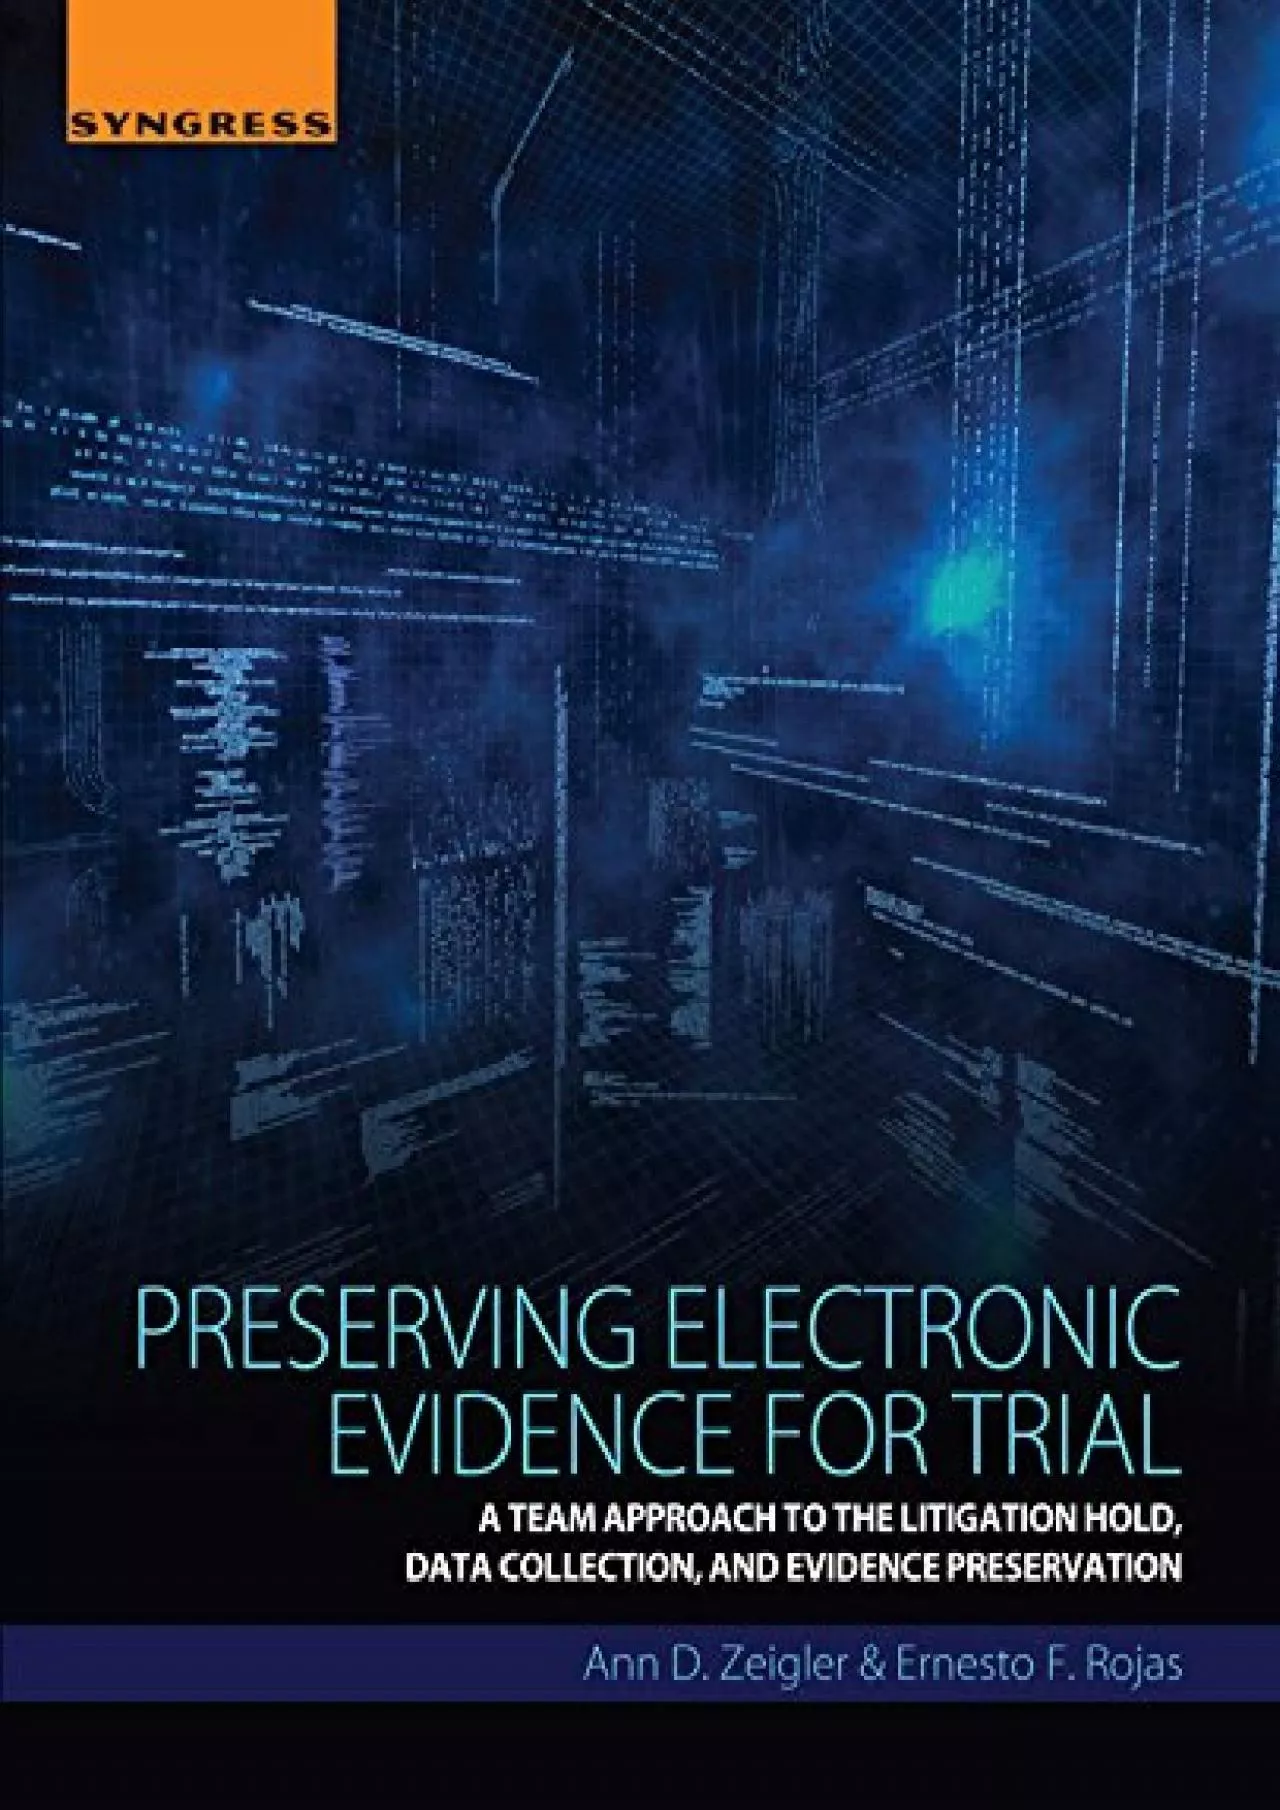 (BOOS)-Preserving Electronic Evidence for Trial: A Team Approach to the Litigation Hold,